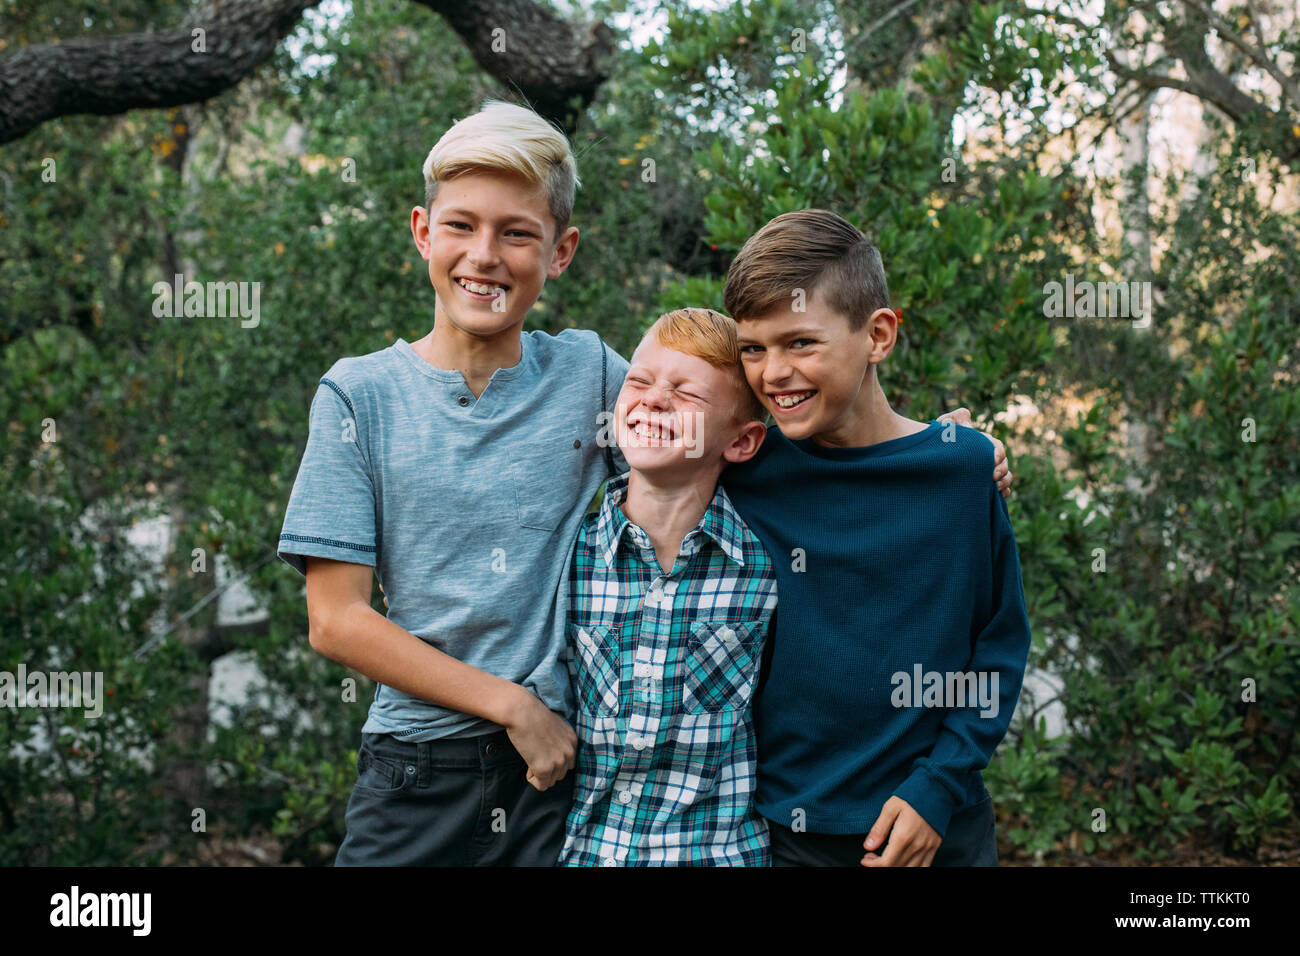 Happy brothers standing side by side against trees at park Stock Photo